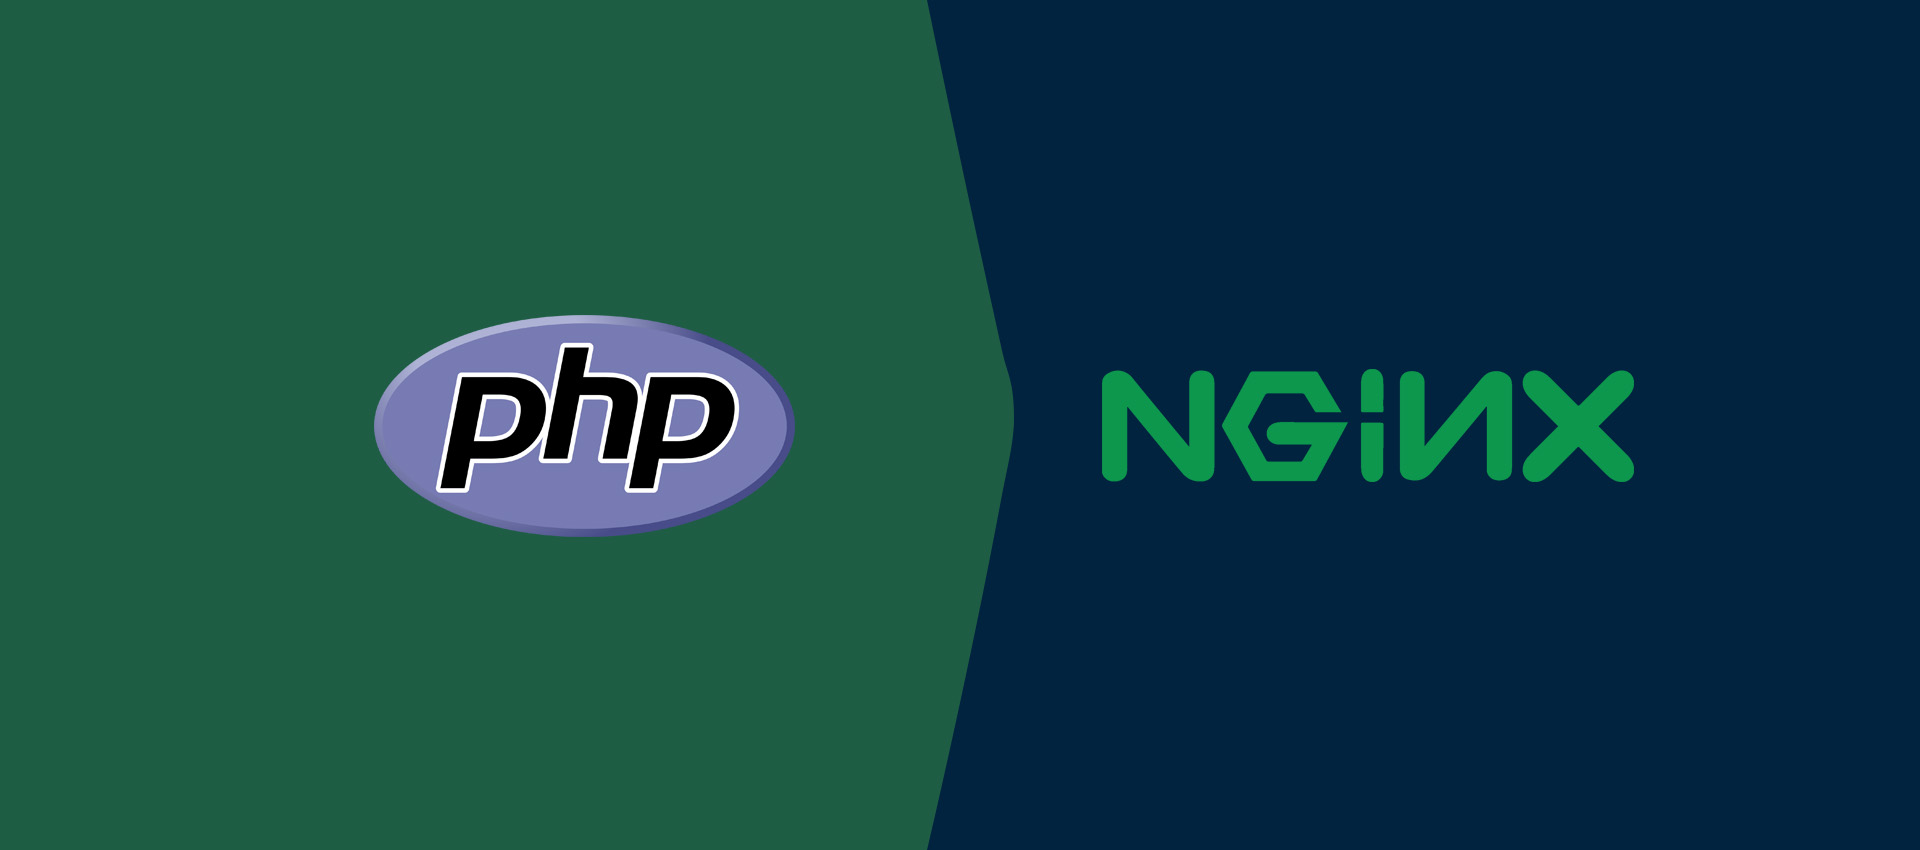 How To Install PHP For Nginx On Ubuntu 18.04 LTS